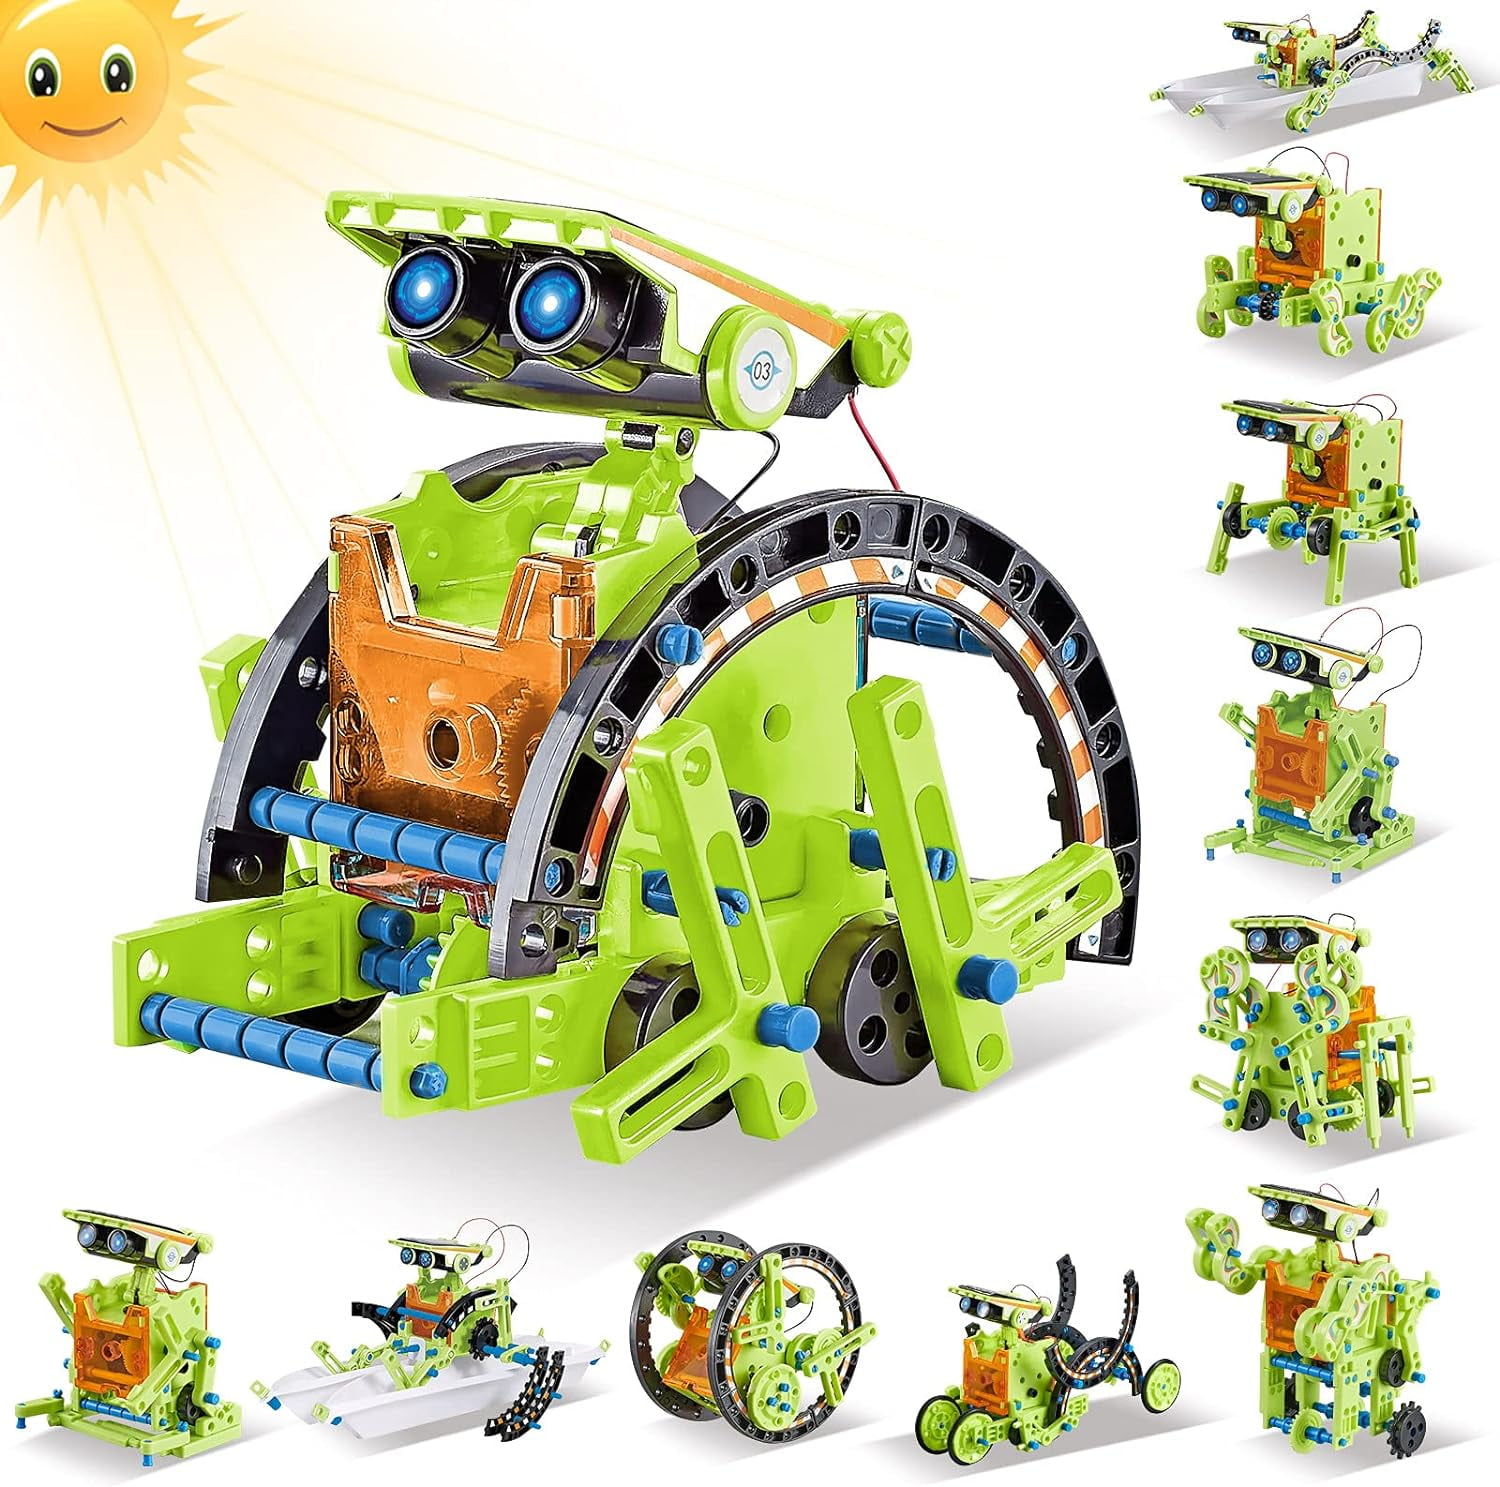  Sillbird STEM 12-in-1 Education Solar Robot Toys -190 Pieces  DIY Building Science Experiment Kit for Kids Aged 8-10 and Older,Solar  Powered by The Sun : Toys & Games